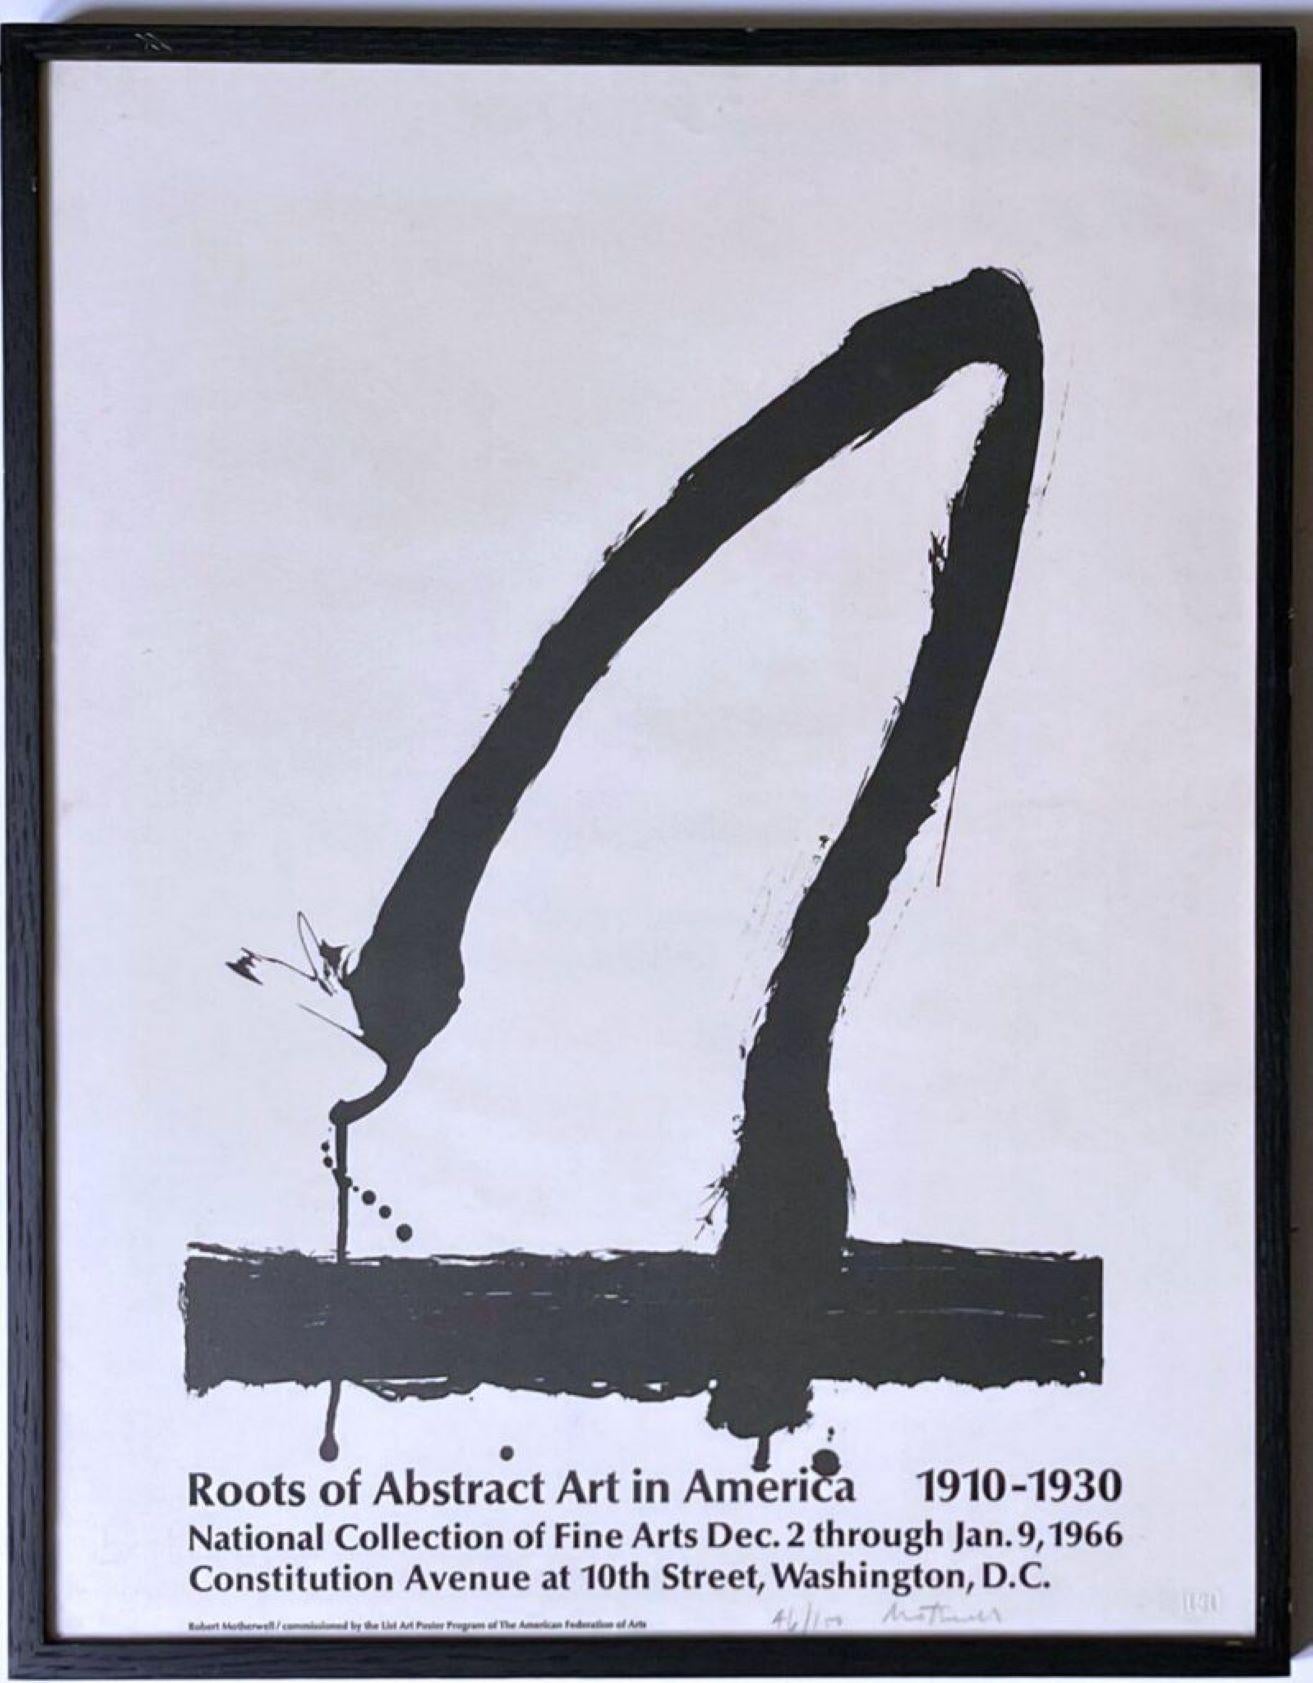 Robert Motherwell Abstract Print - Roots of Abstract Art in America, from the VIP hand signed limited edition print